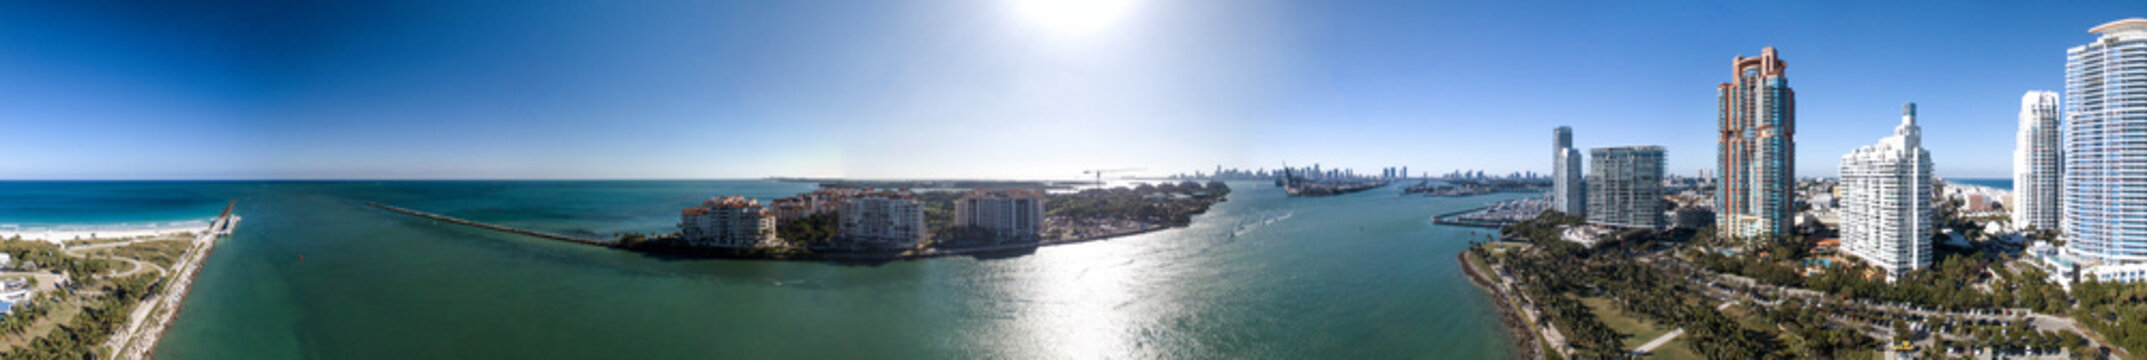 South Pointe Park in Miami. Panoramic aerial view of city skyline at dusk